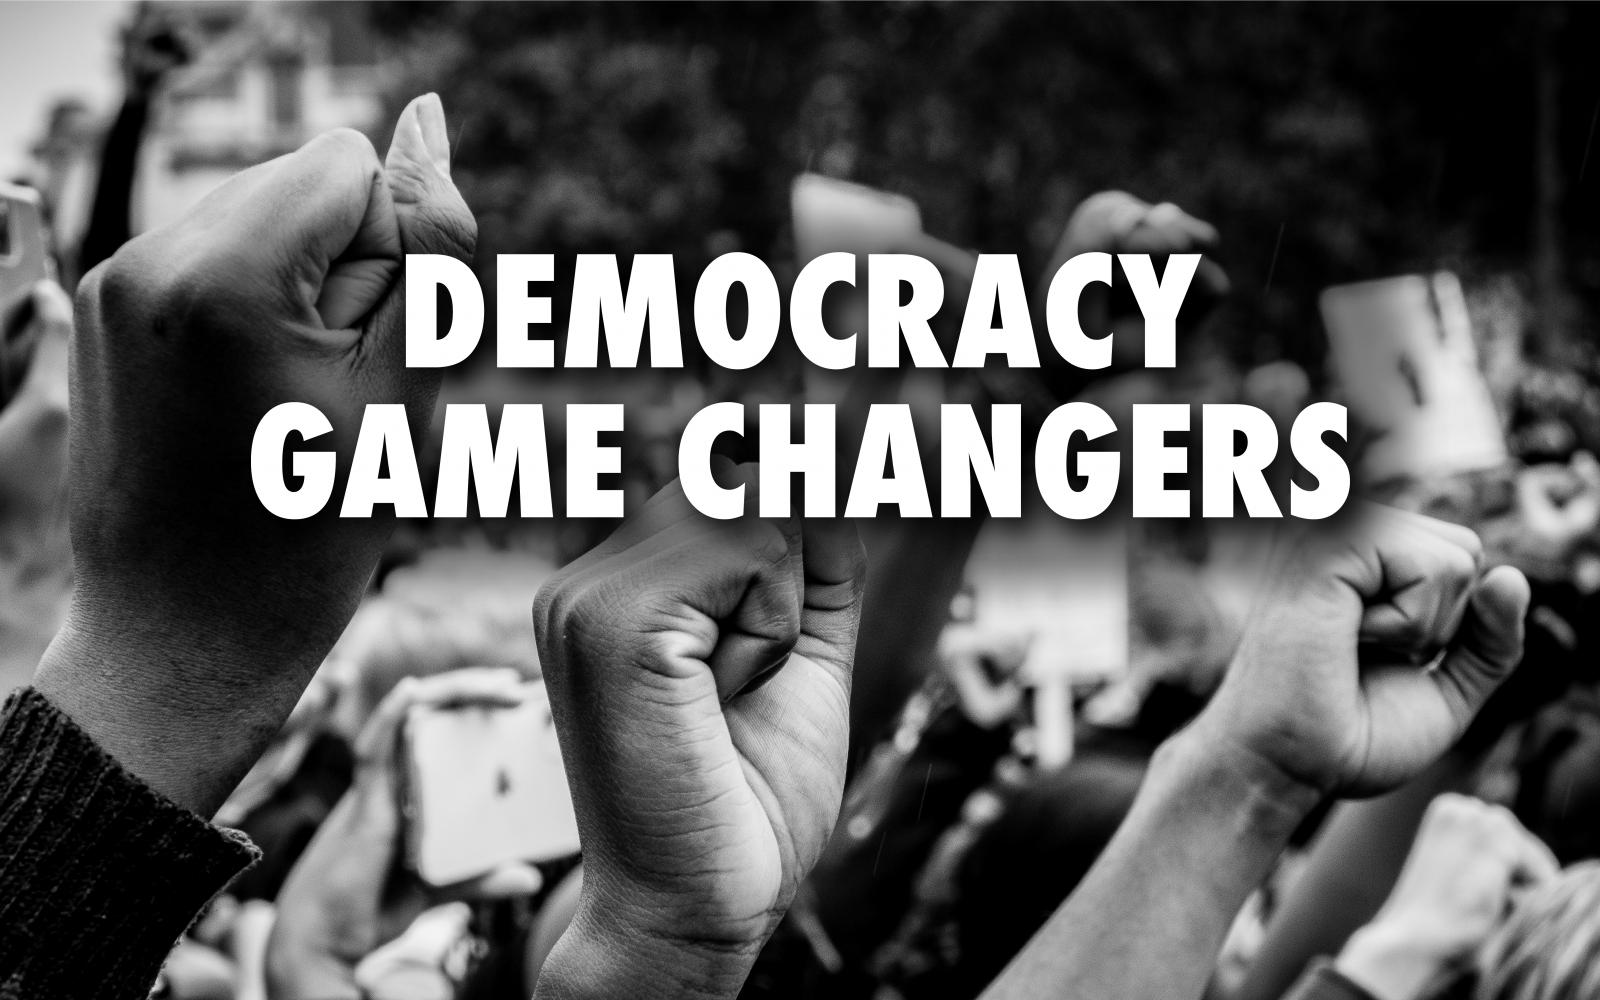 NDI Champions “Democracy Game Changers” for S4D Year of Action